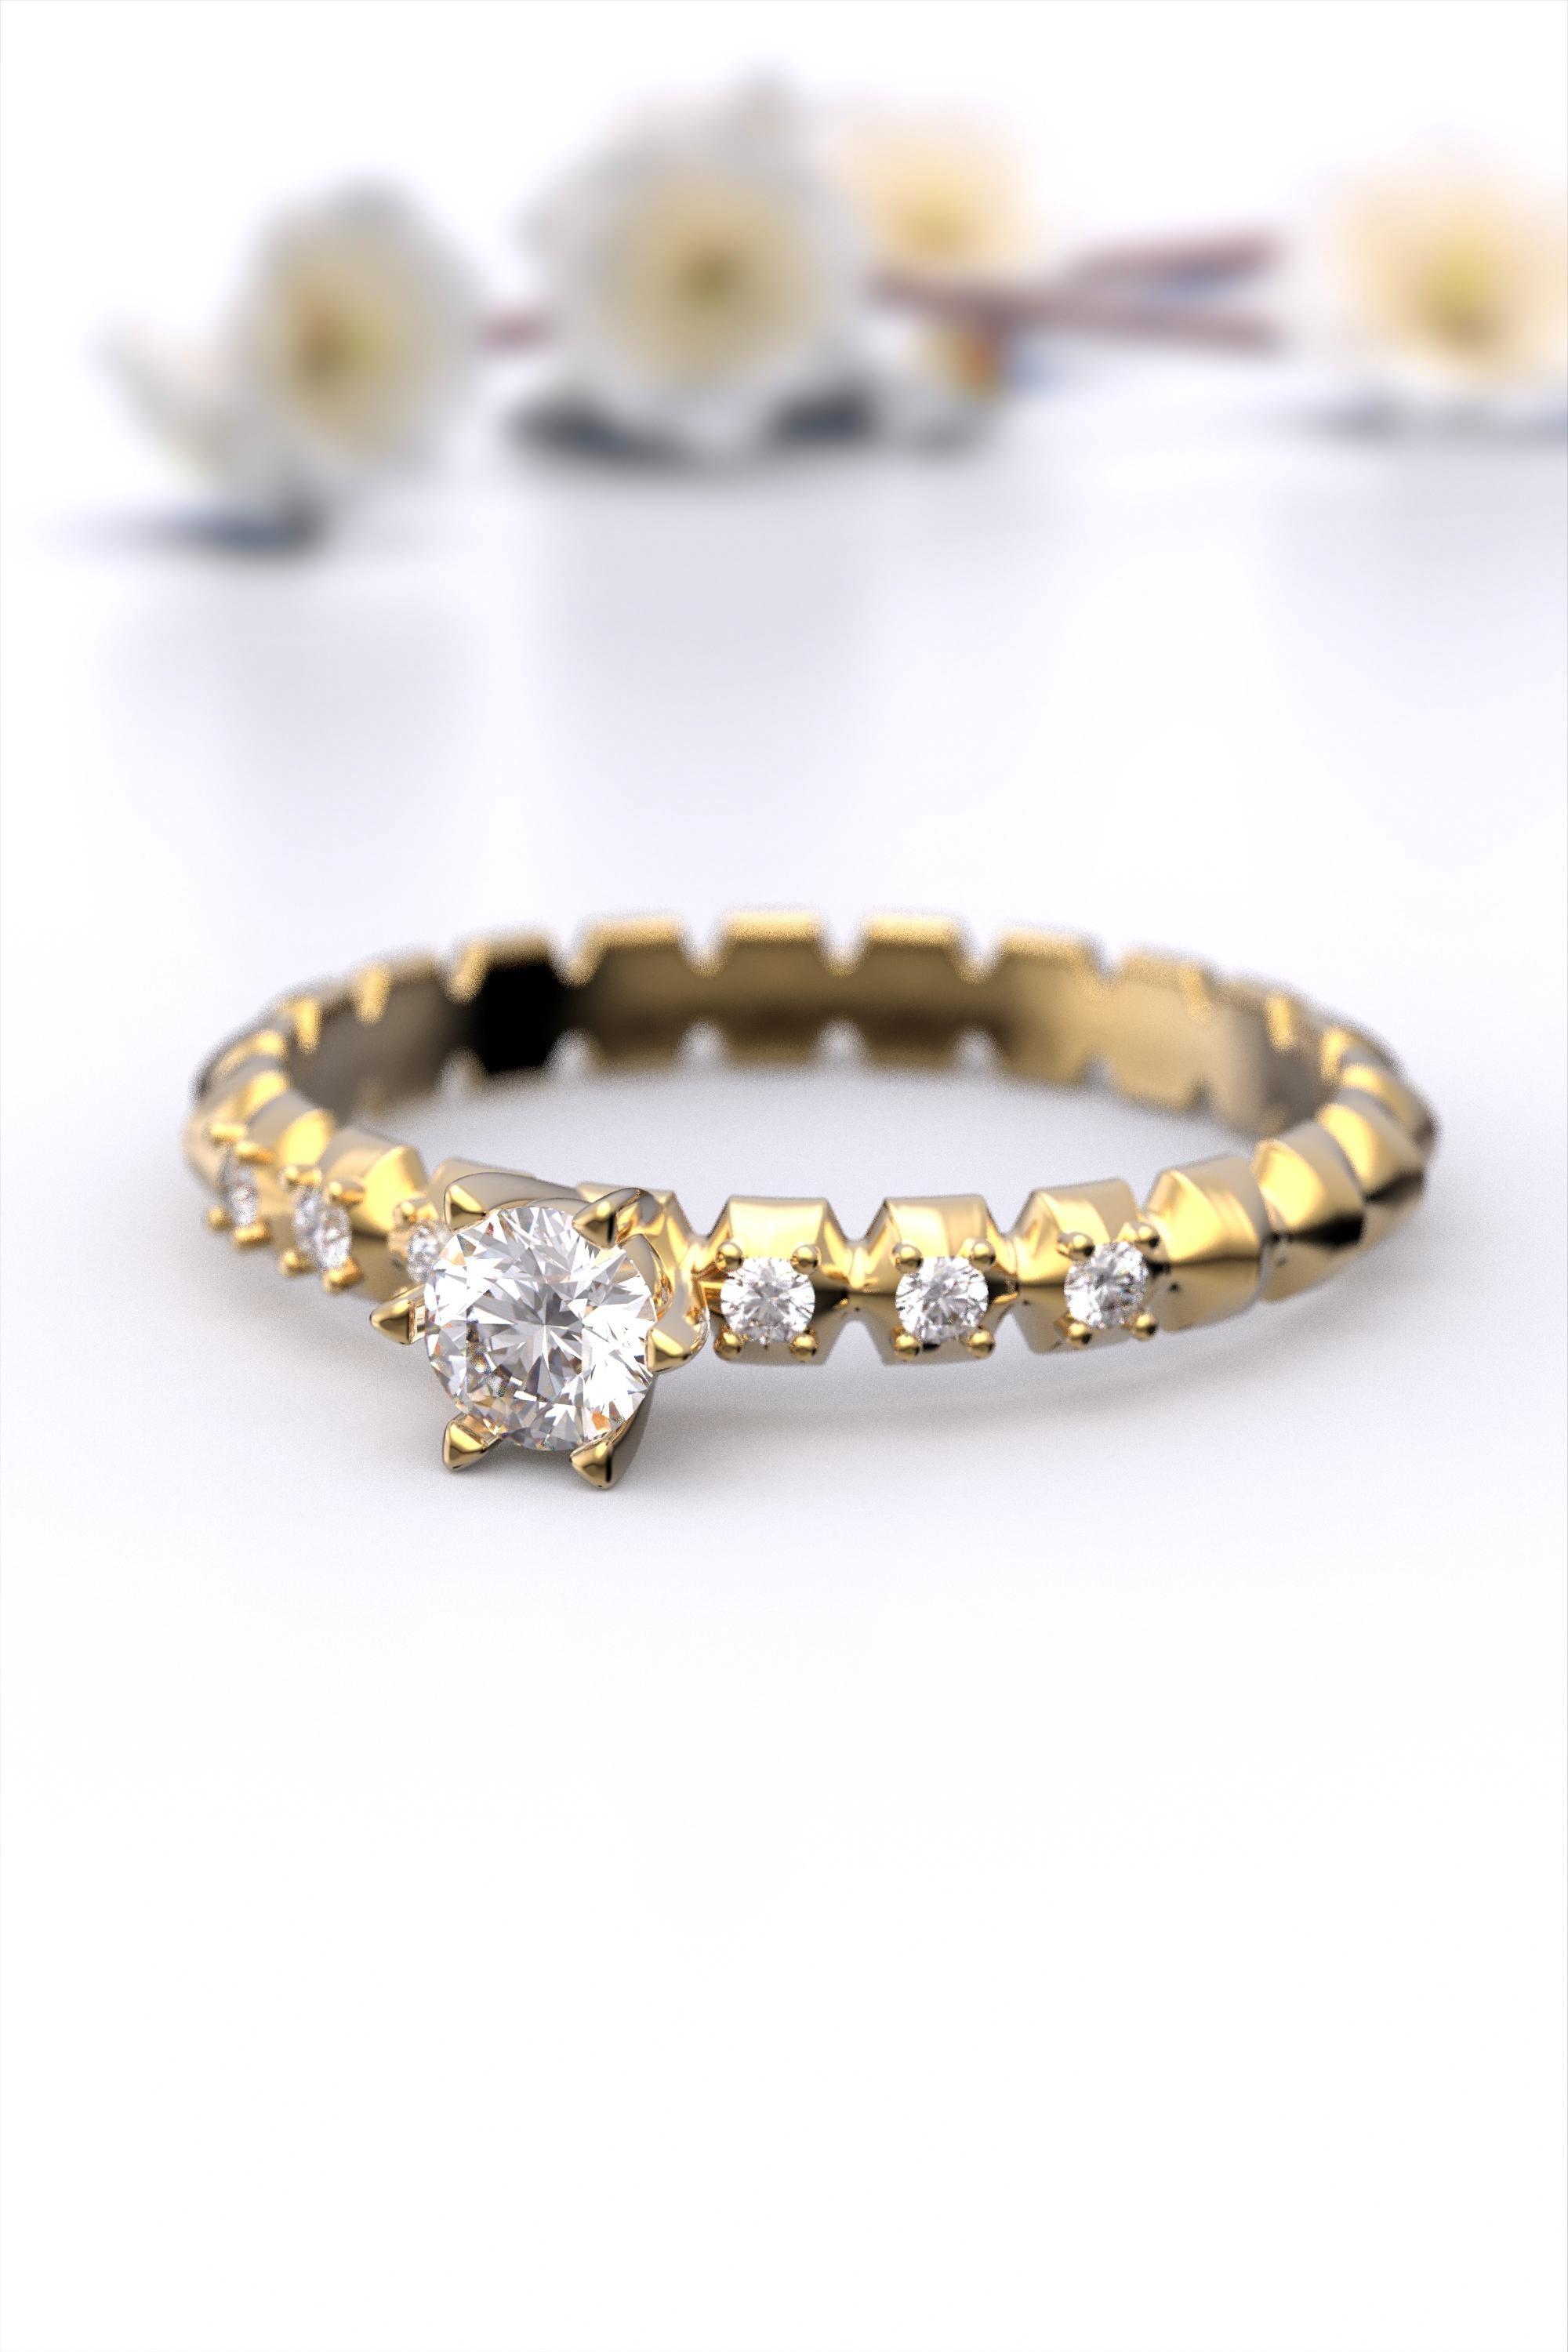 For Sale:  Italian-Made 0.32 Carat Diamond Engagement Ring in 18k Solid Gold 5